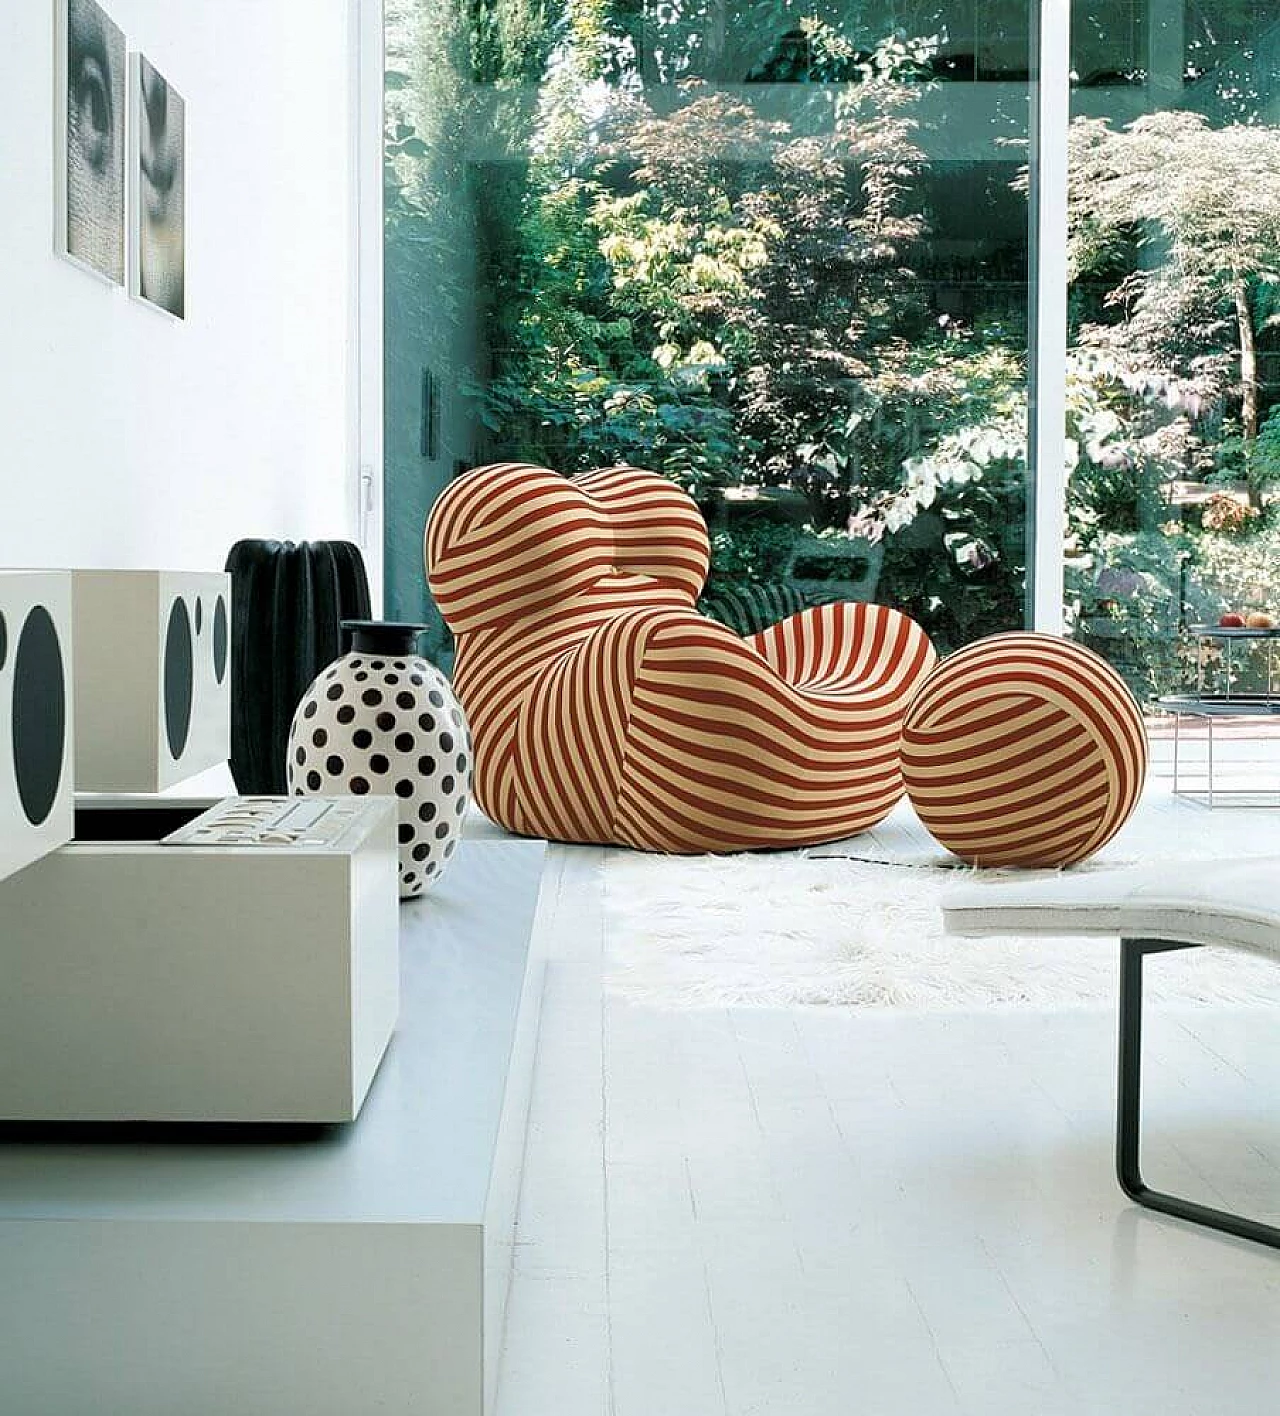 UP armchair and pouf by Gaetano Pesce for B&B Italia 1